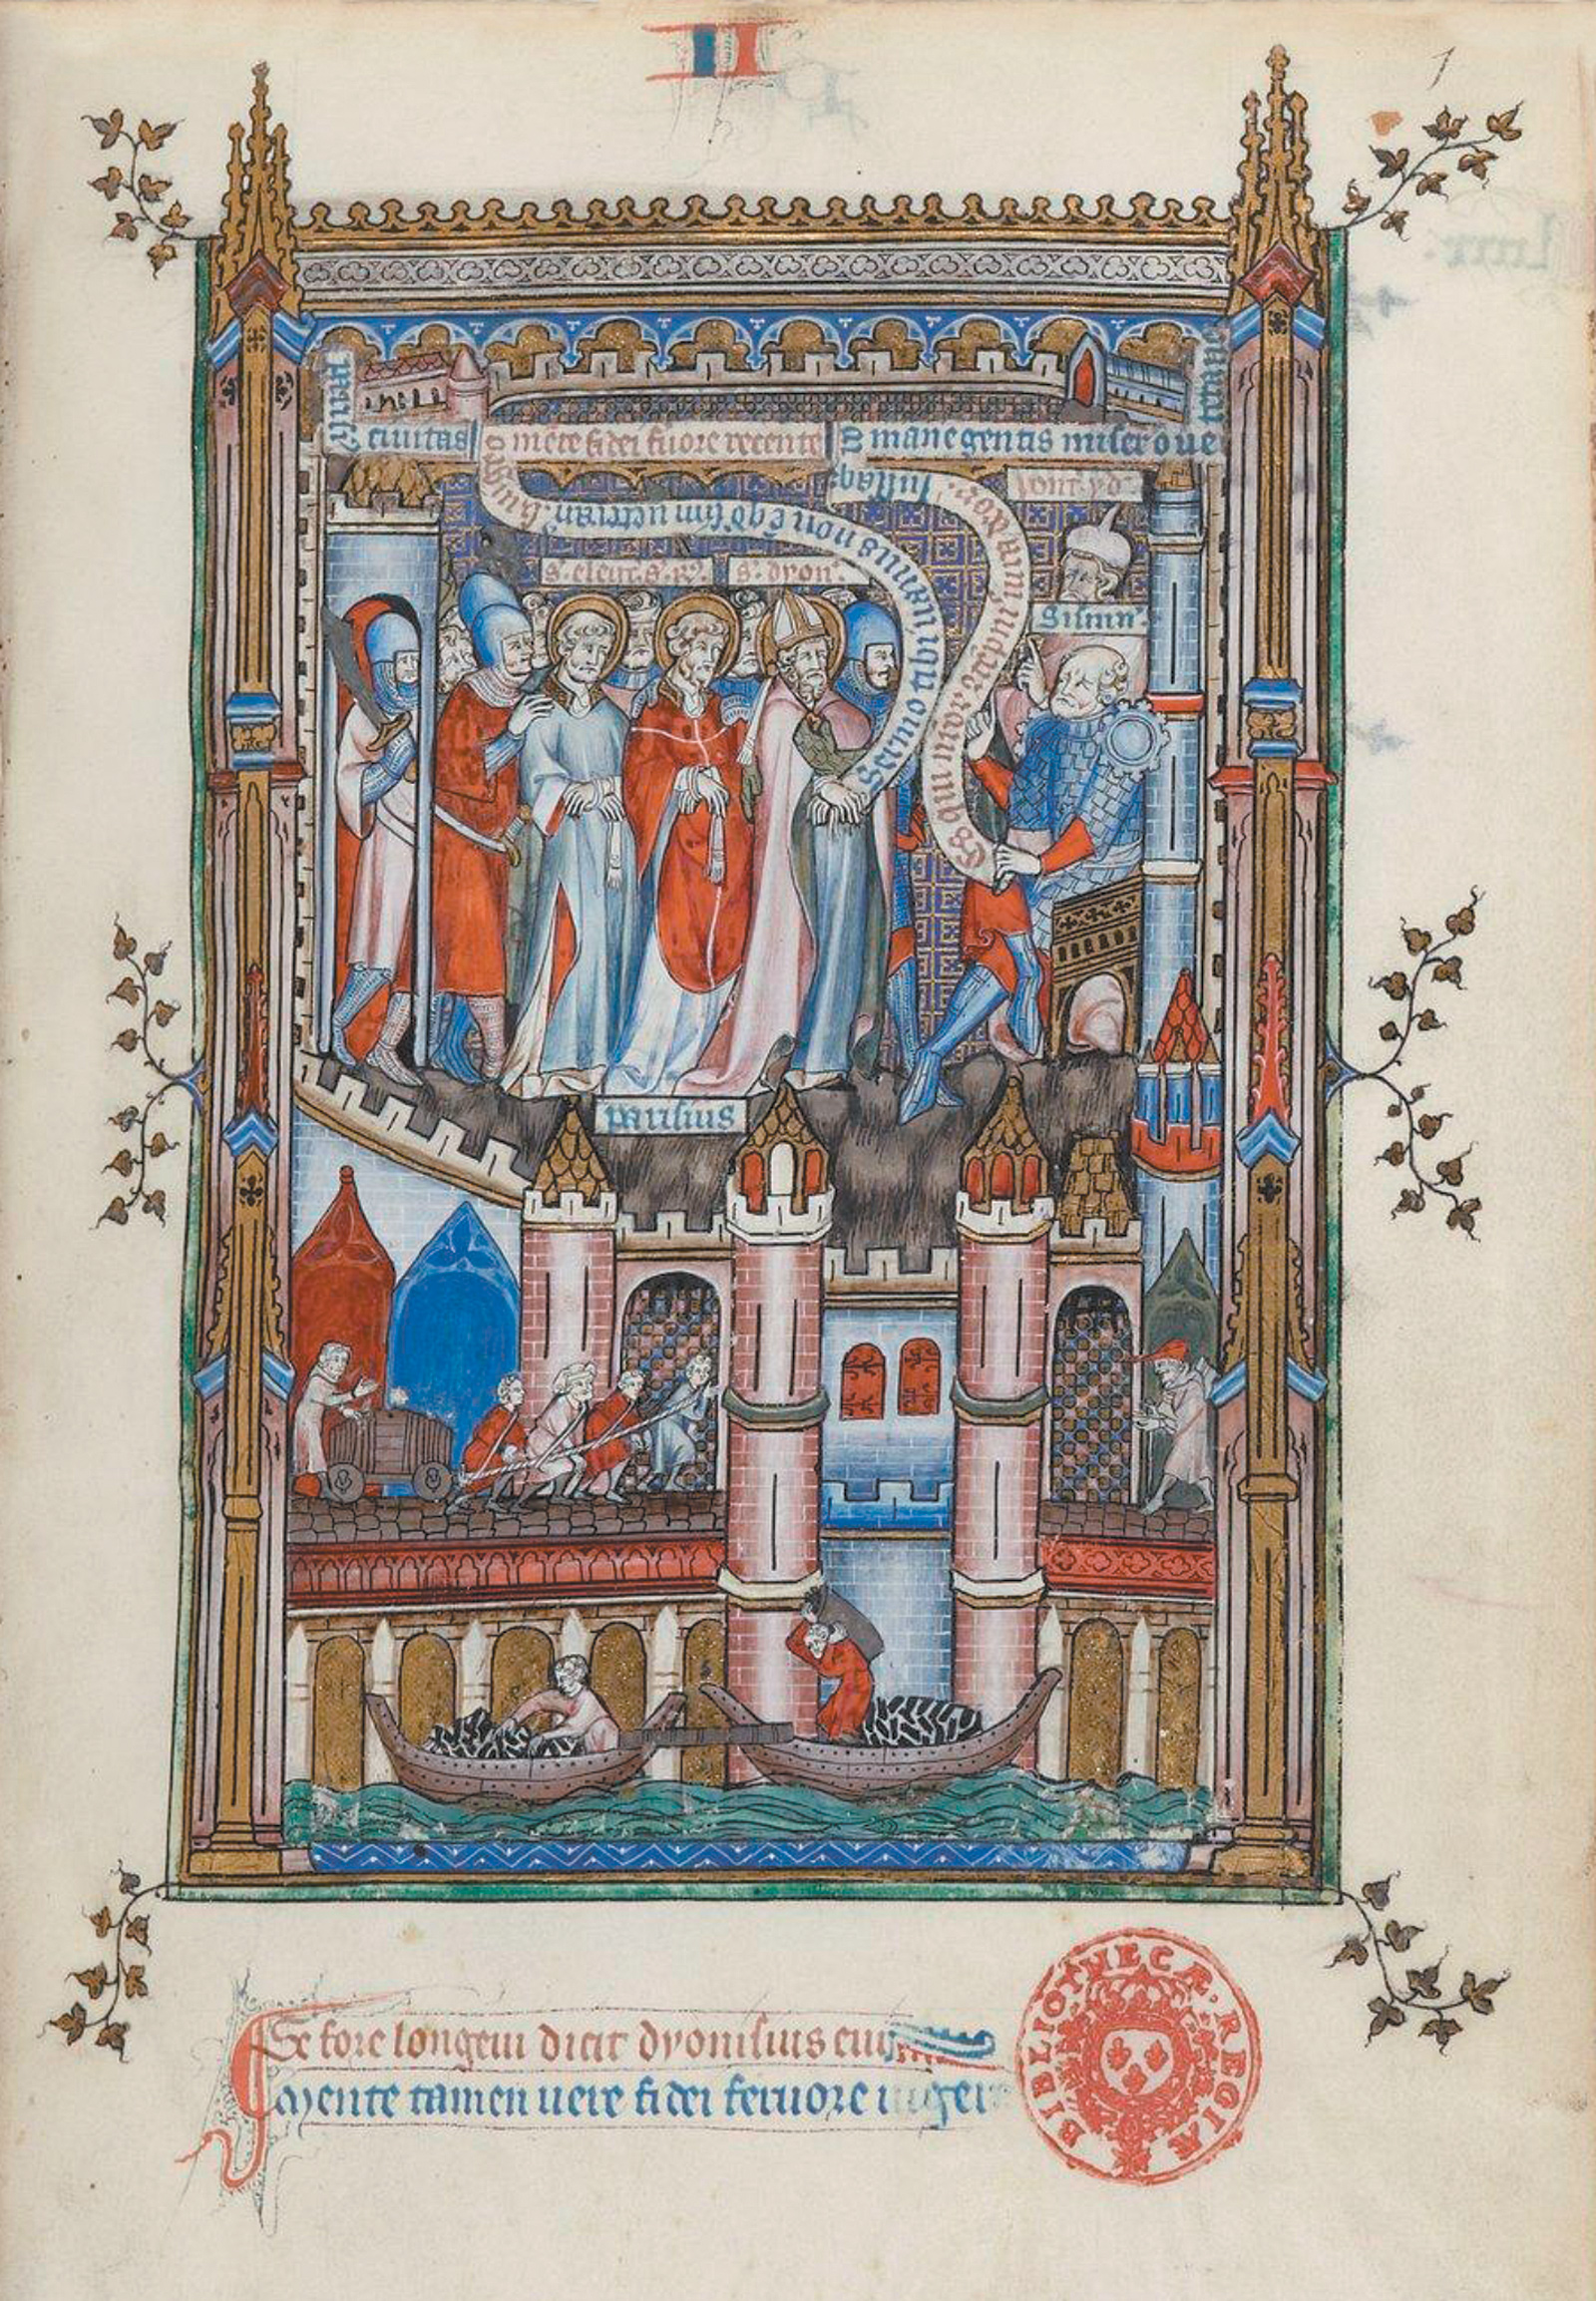 A page from La Vie de Saint Denys, an illuminated manuscript presented by Gilles de Pontoise, abbot of Saint-Denis, to King Philippe V in 1317. ‘Below large-scale representations of the saint’s preaching, trials, tortures, and death,’ Eamon Duffy writes, are ‘vivid vignettes of life along the Seine’: ‘diminutive townspeople shop or borrow from moneylenders, physicians inspect flasks of their patients’ urine, animals are driven to slaughter, millers stagger under sacks of corn, workmen trundle wheelbarrows, and boatmen row goods and passengers up and down the river.’